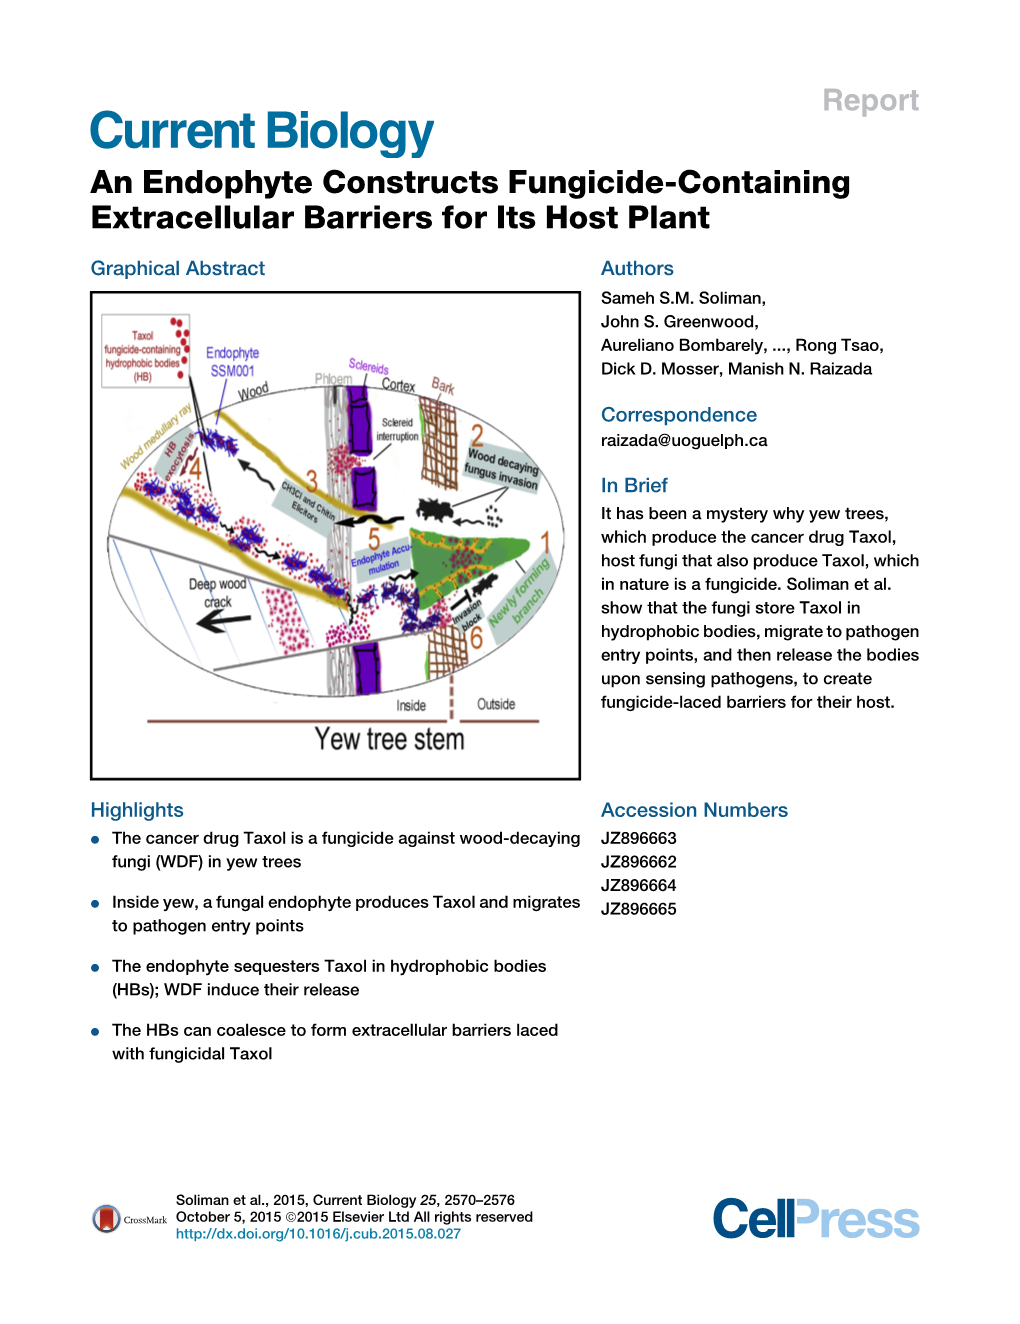 An Endophyte Constructs Fungicide-Containing Extracellular Barriers for Its Host Plant